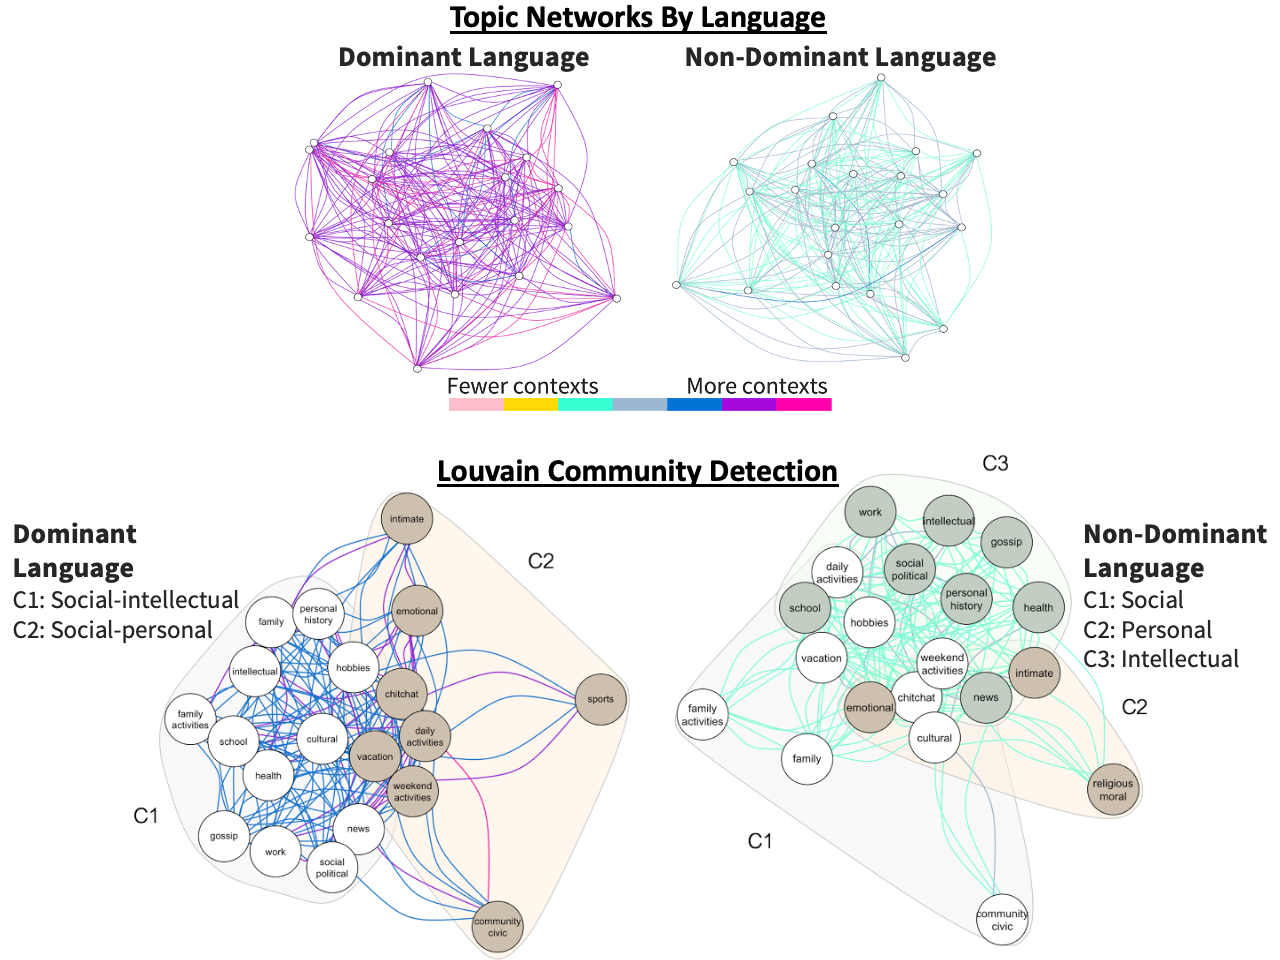 topic networks and communities by language (dominant vs. non-dominant). networks for the dominant language are larger and have fewer communities. networks for the non-dominant language are smaller but have more communities.